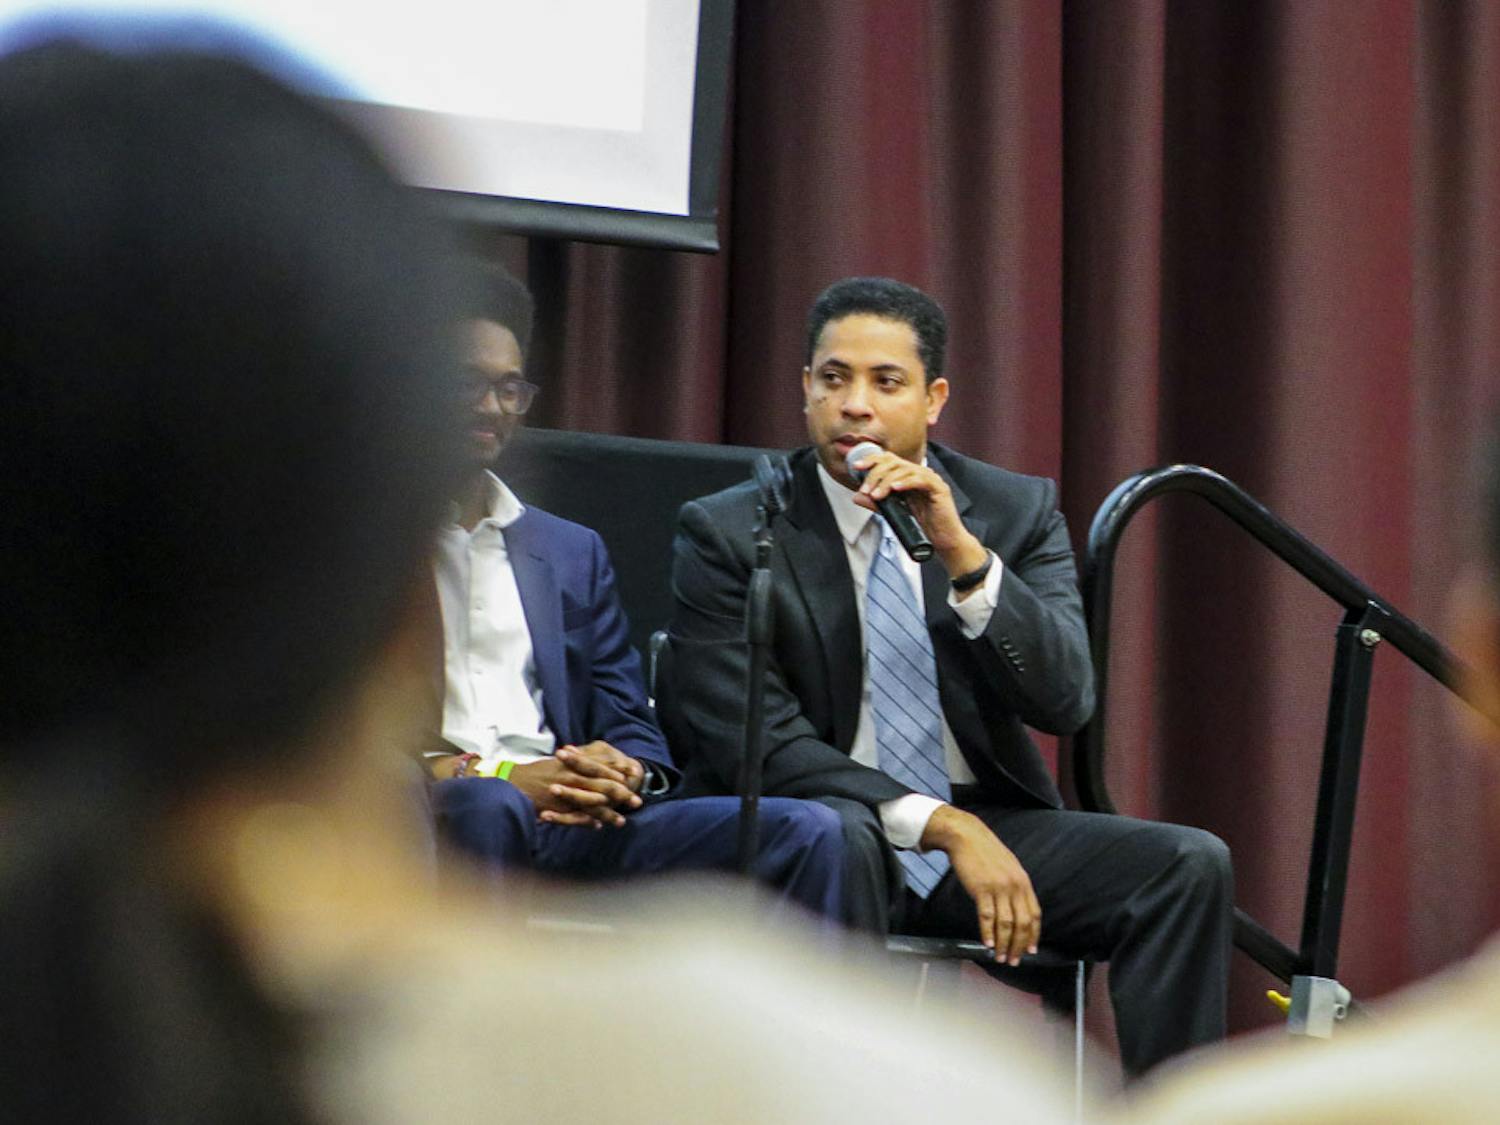 Harry Singleton, an adjunct professor in African American and Religious studies at USC, talks about the value diversity brings to the workspace during the Alpha Kappa Psi panel in the Russell House Ballroom on Feb. 20, 2023. Panel members touched on the benefits of diversity, and the benefits it brings to an organization.